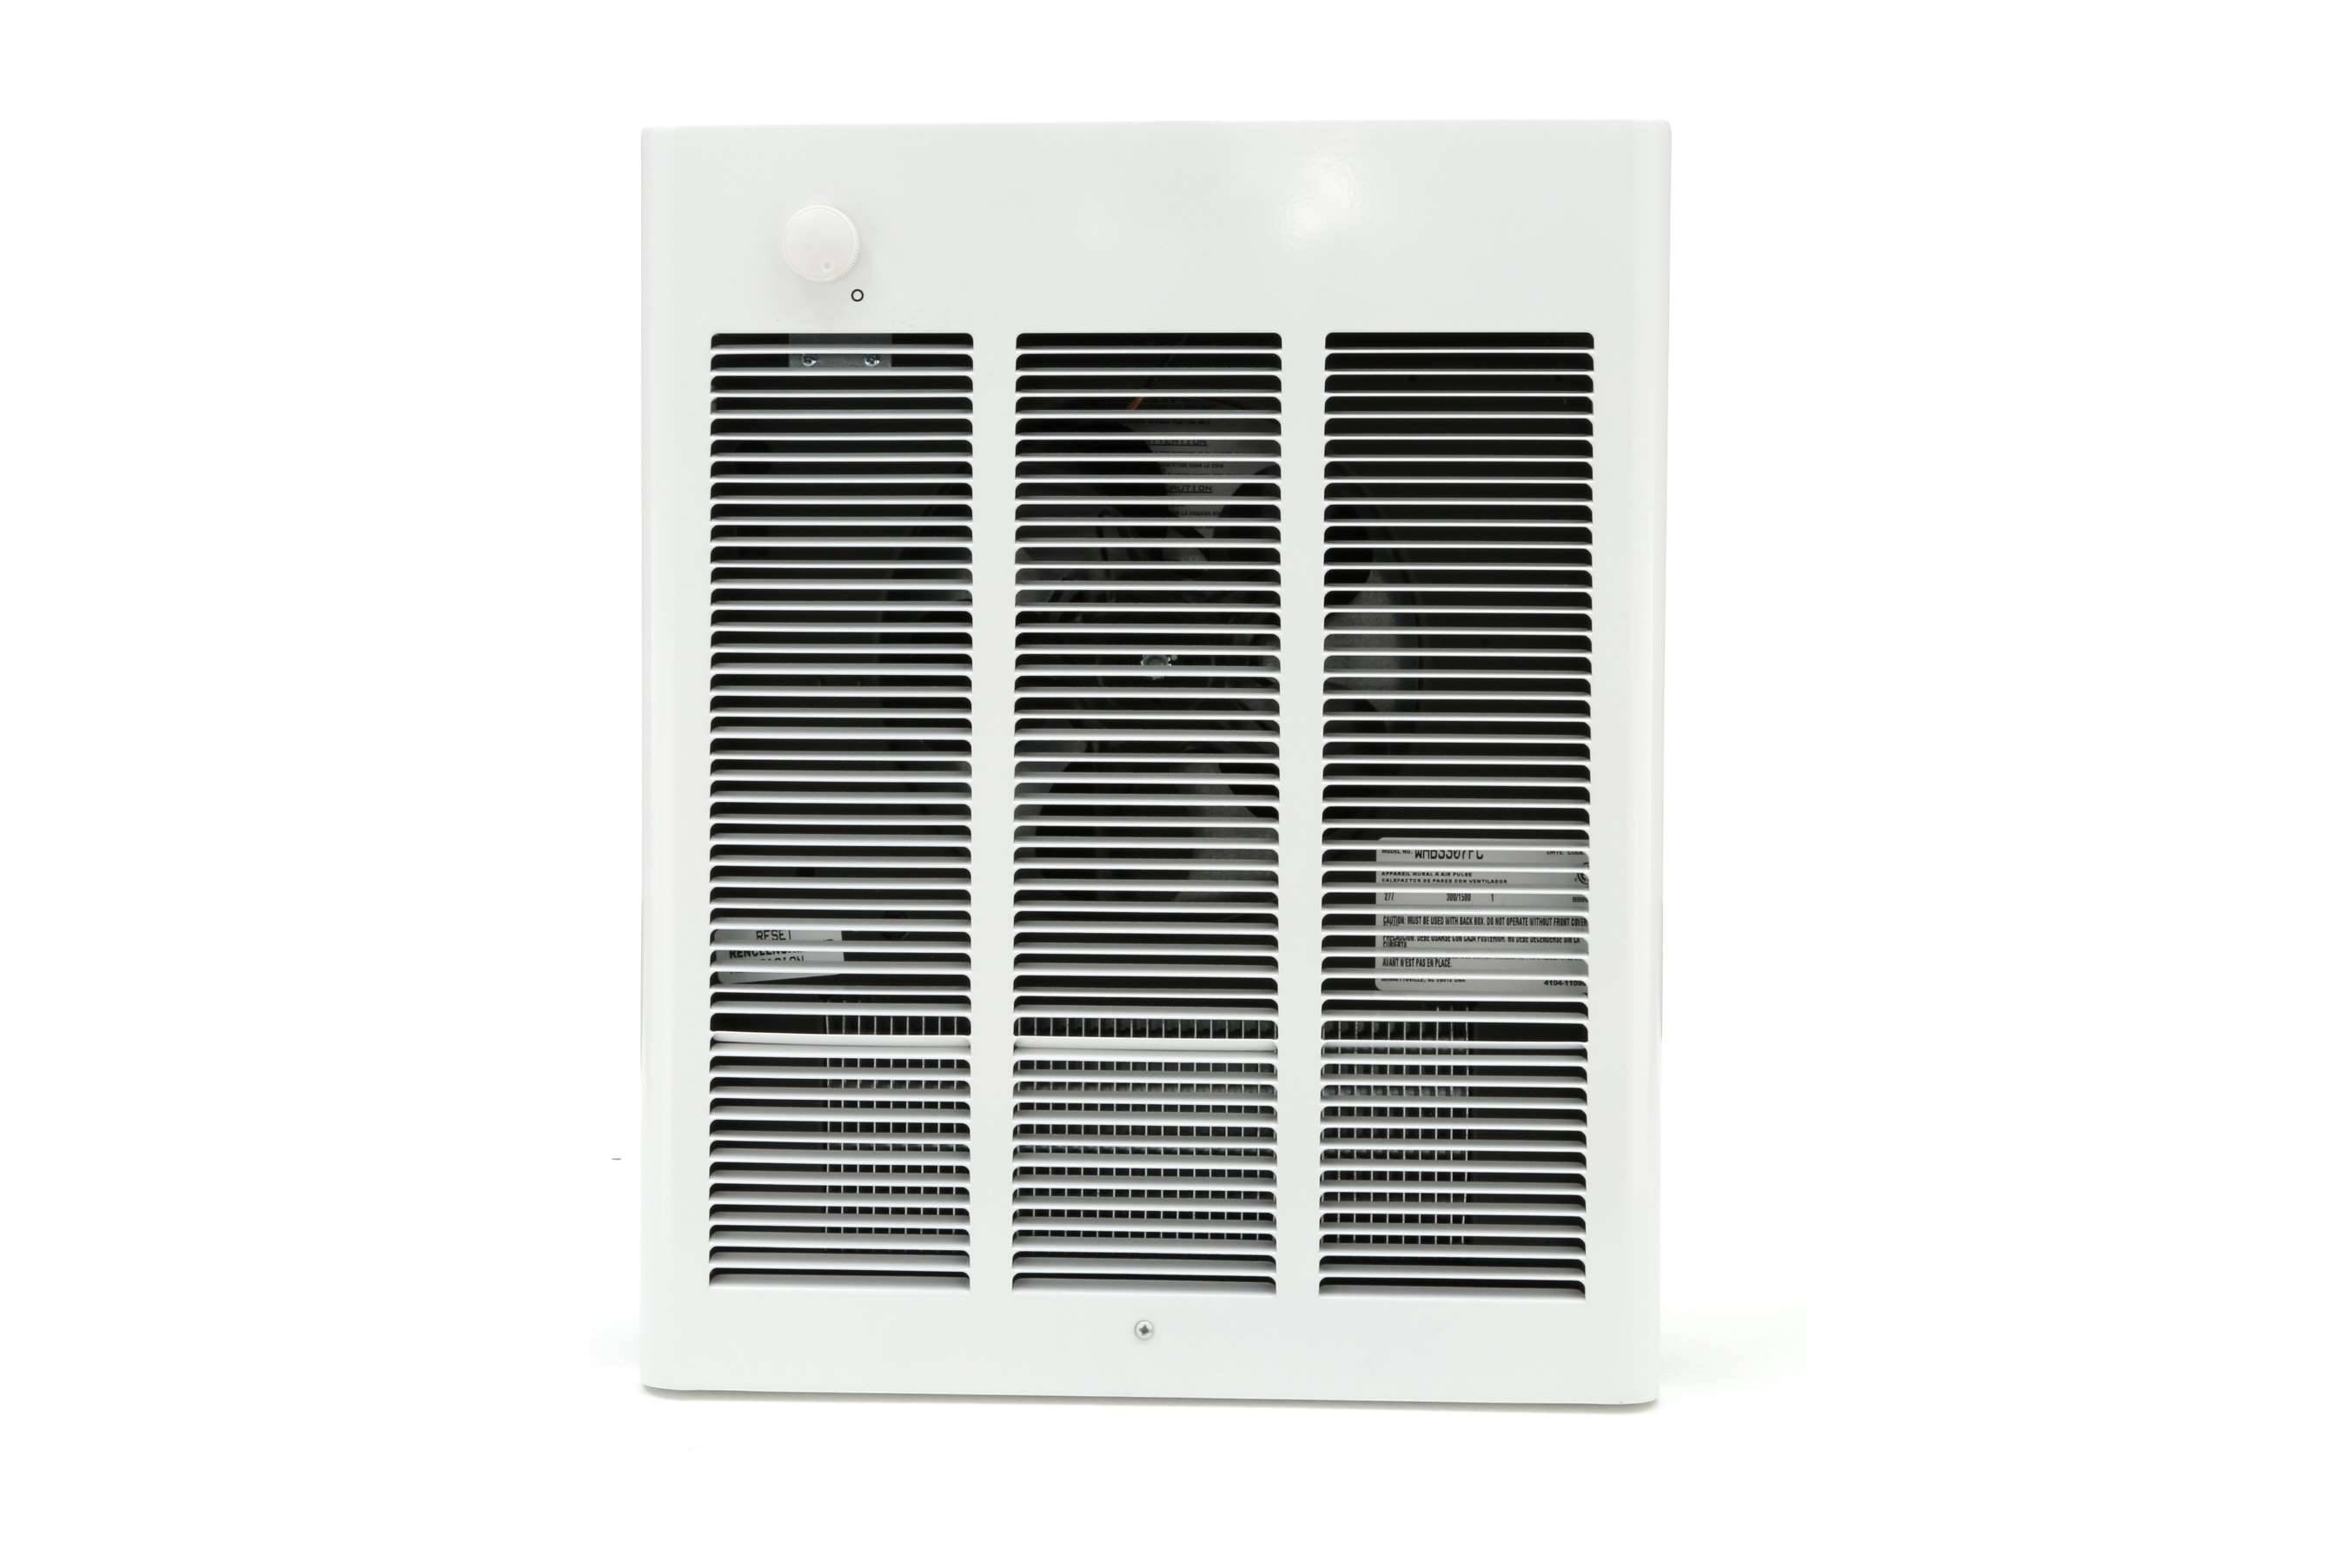 QMARK® LFK304F 1-Phase Commercial Fan Forced Heater, 3839 to 10236 Btu/hr, 208 to 240 V, 1125 to 3000 W